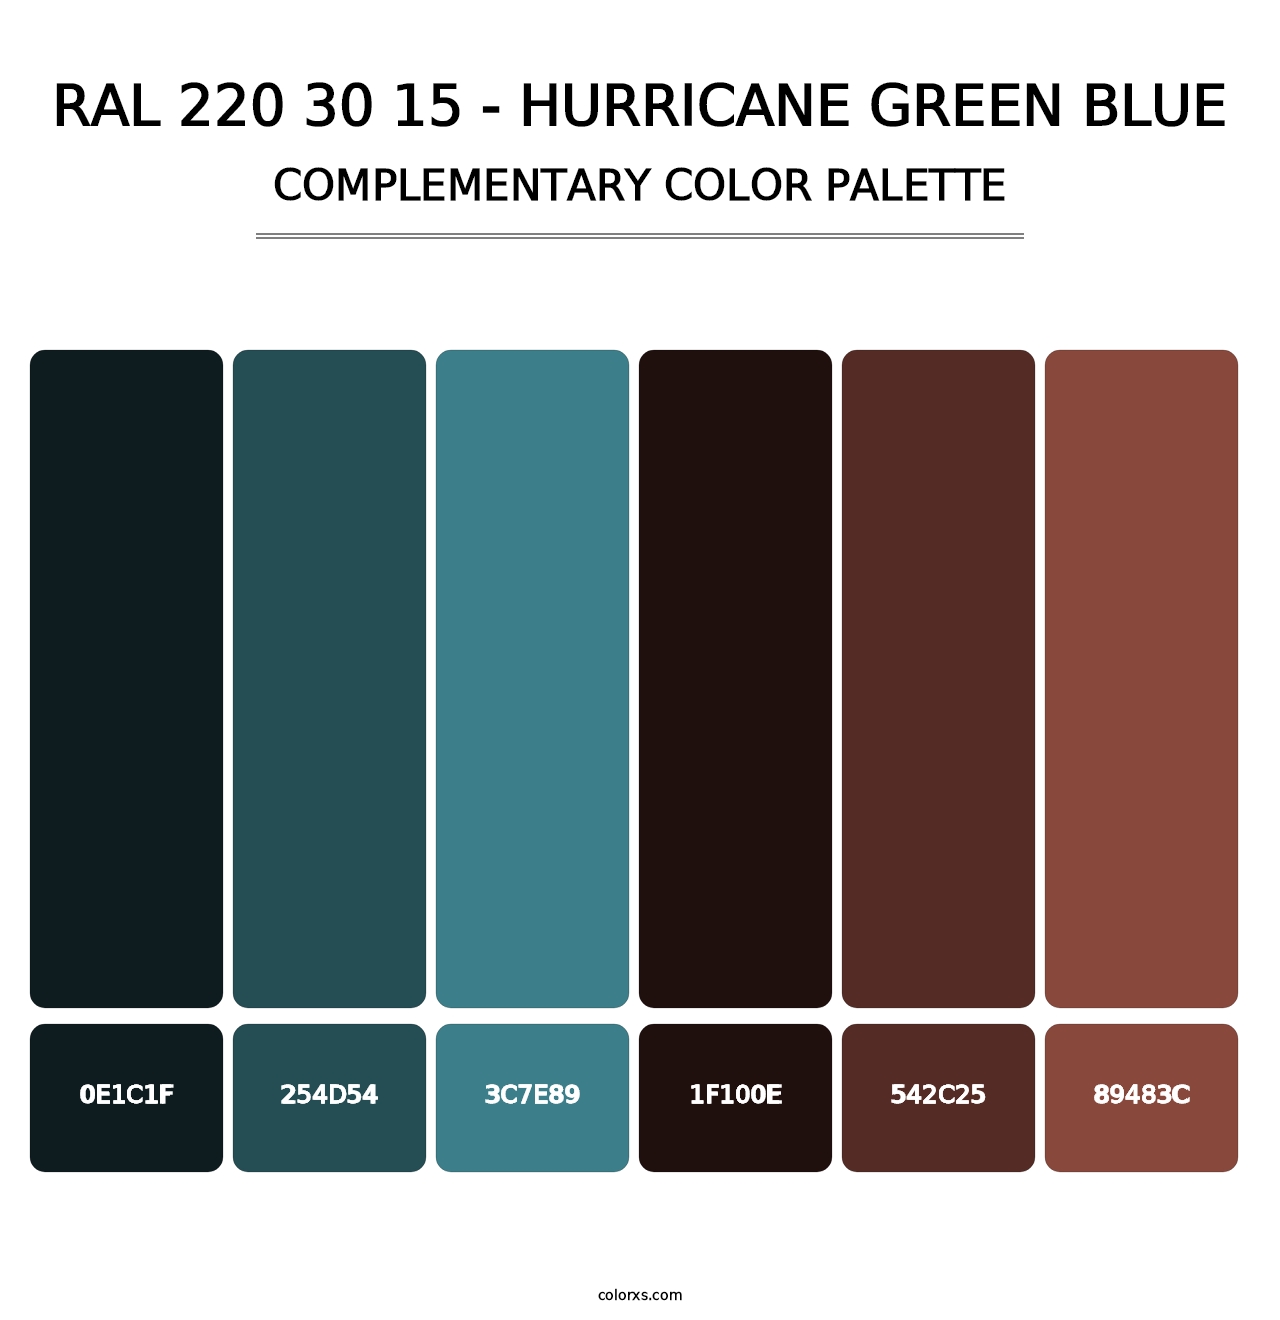 RAL 220 30 15 - Hurricane Green Blue - Complementary Color Palette